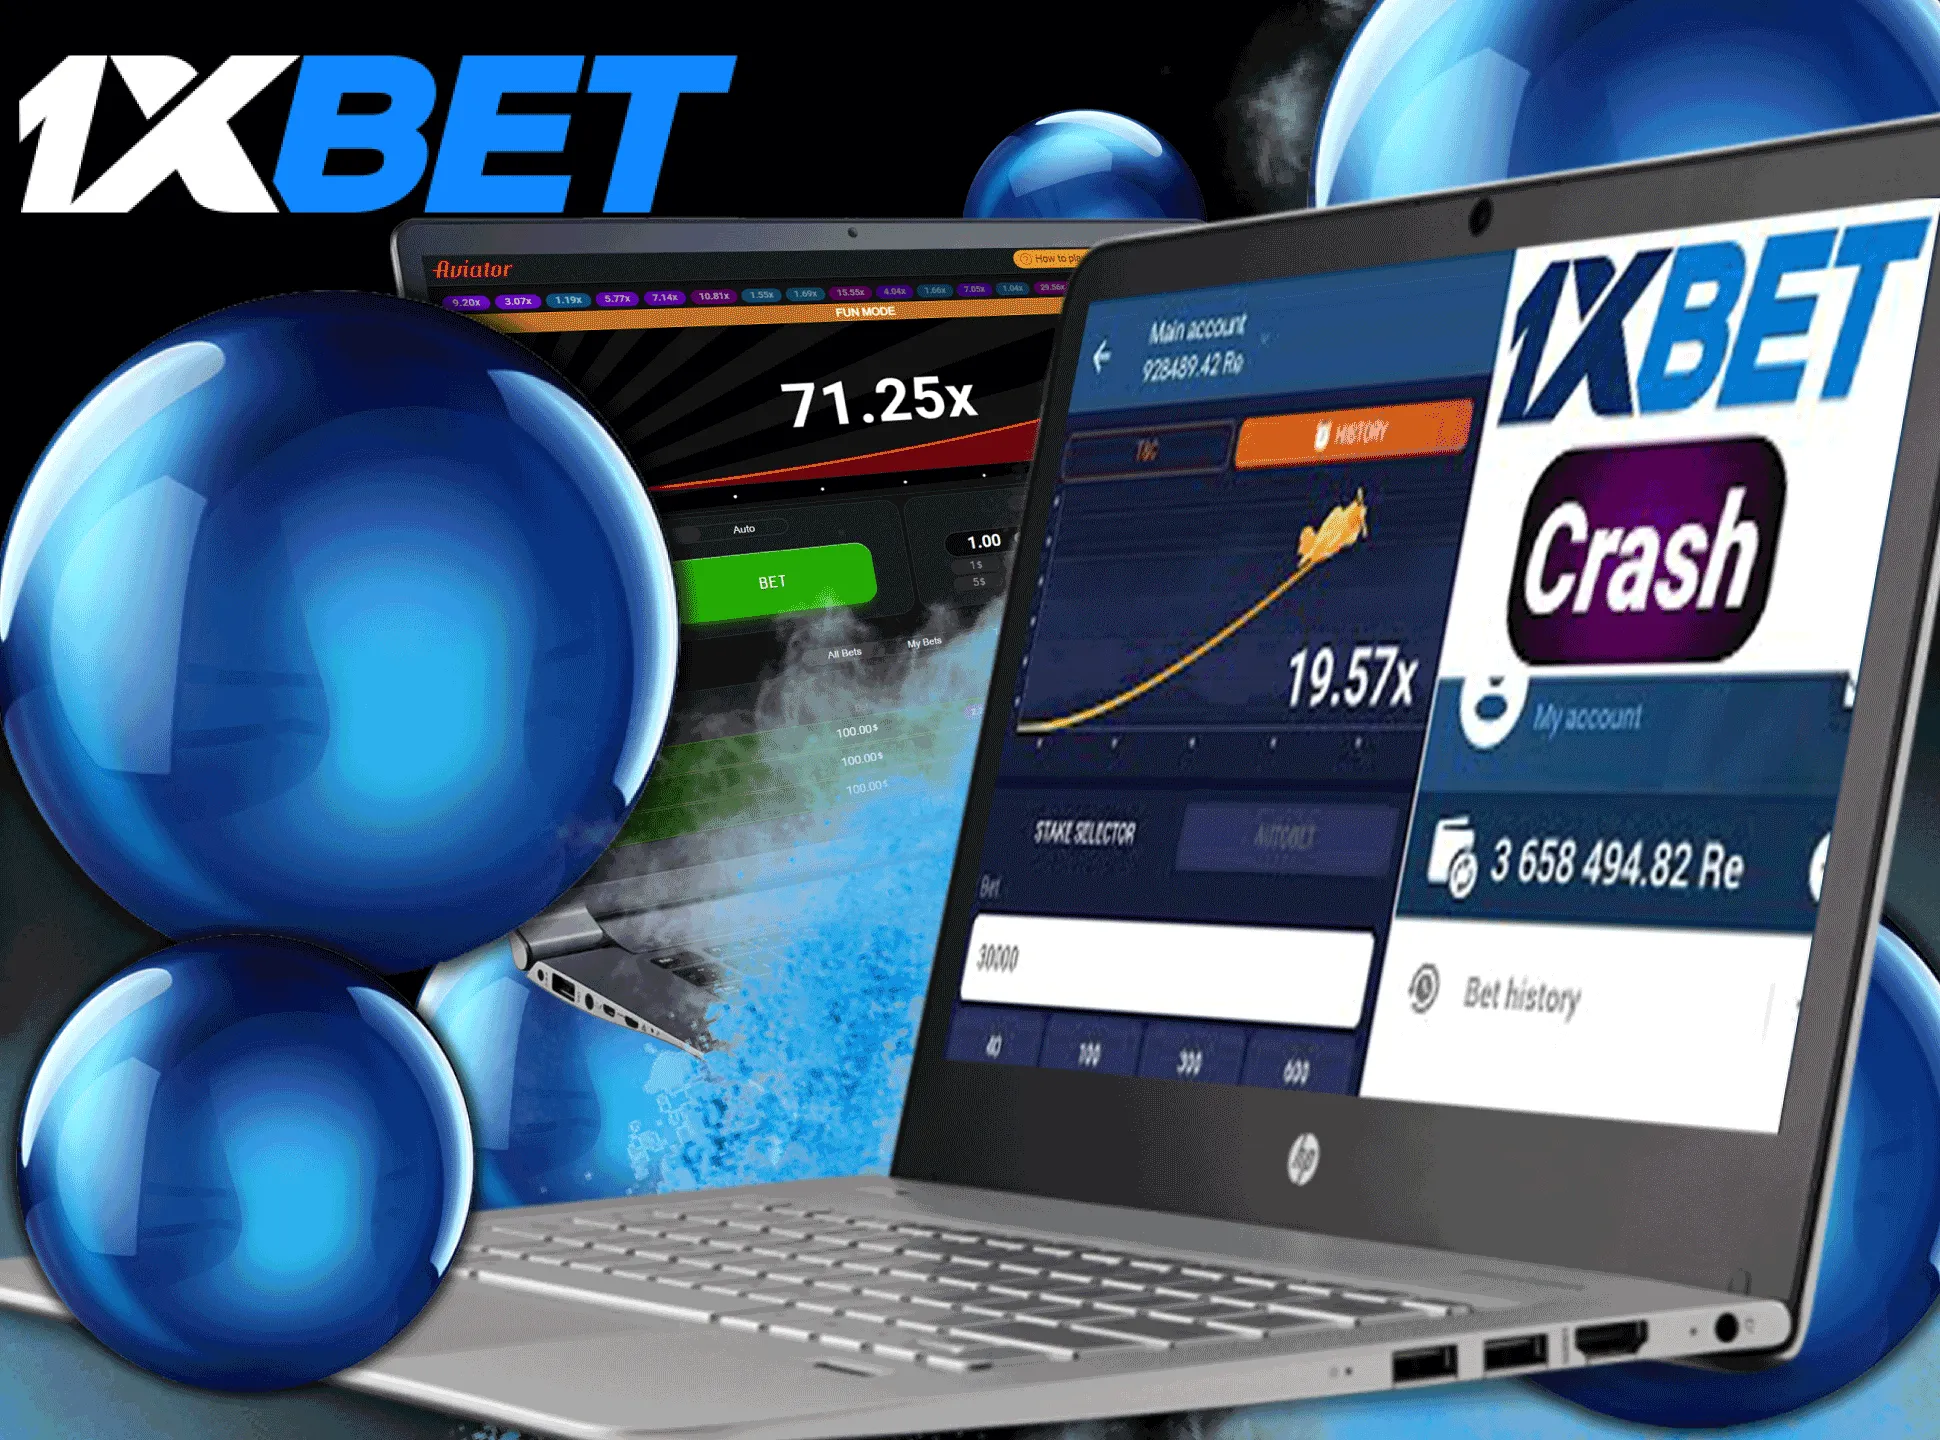 It's safe and legal to play Aviator in the 1xbet casino.